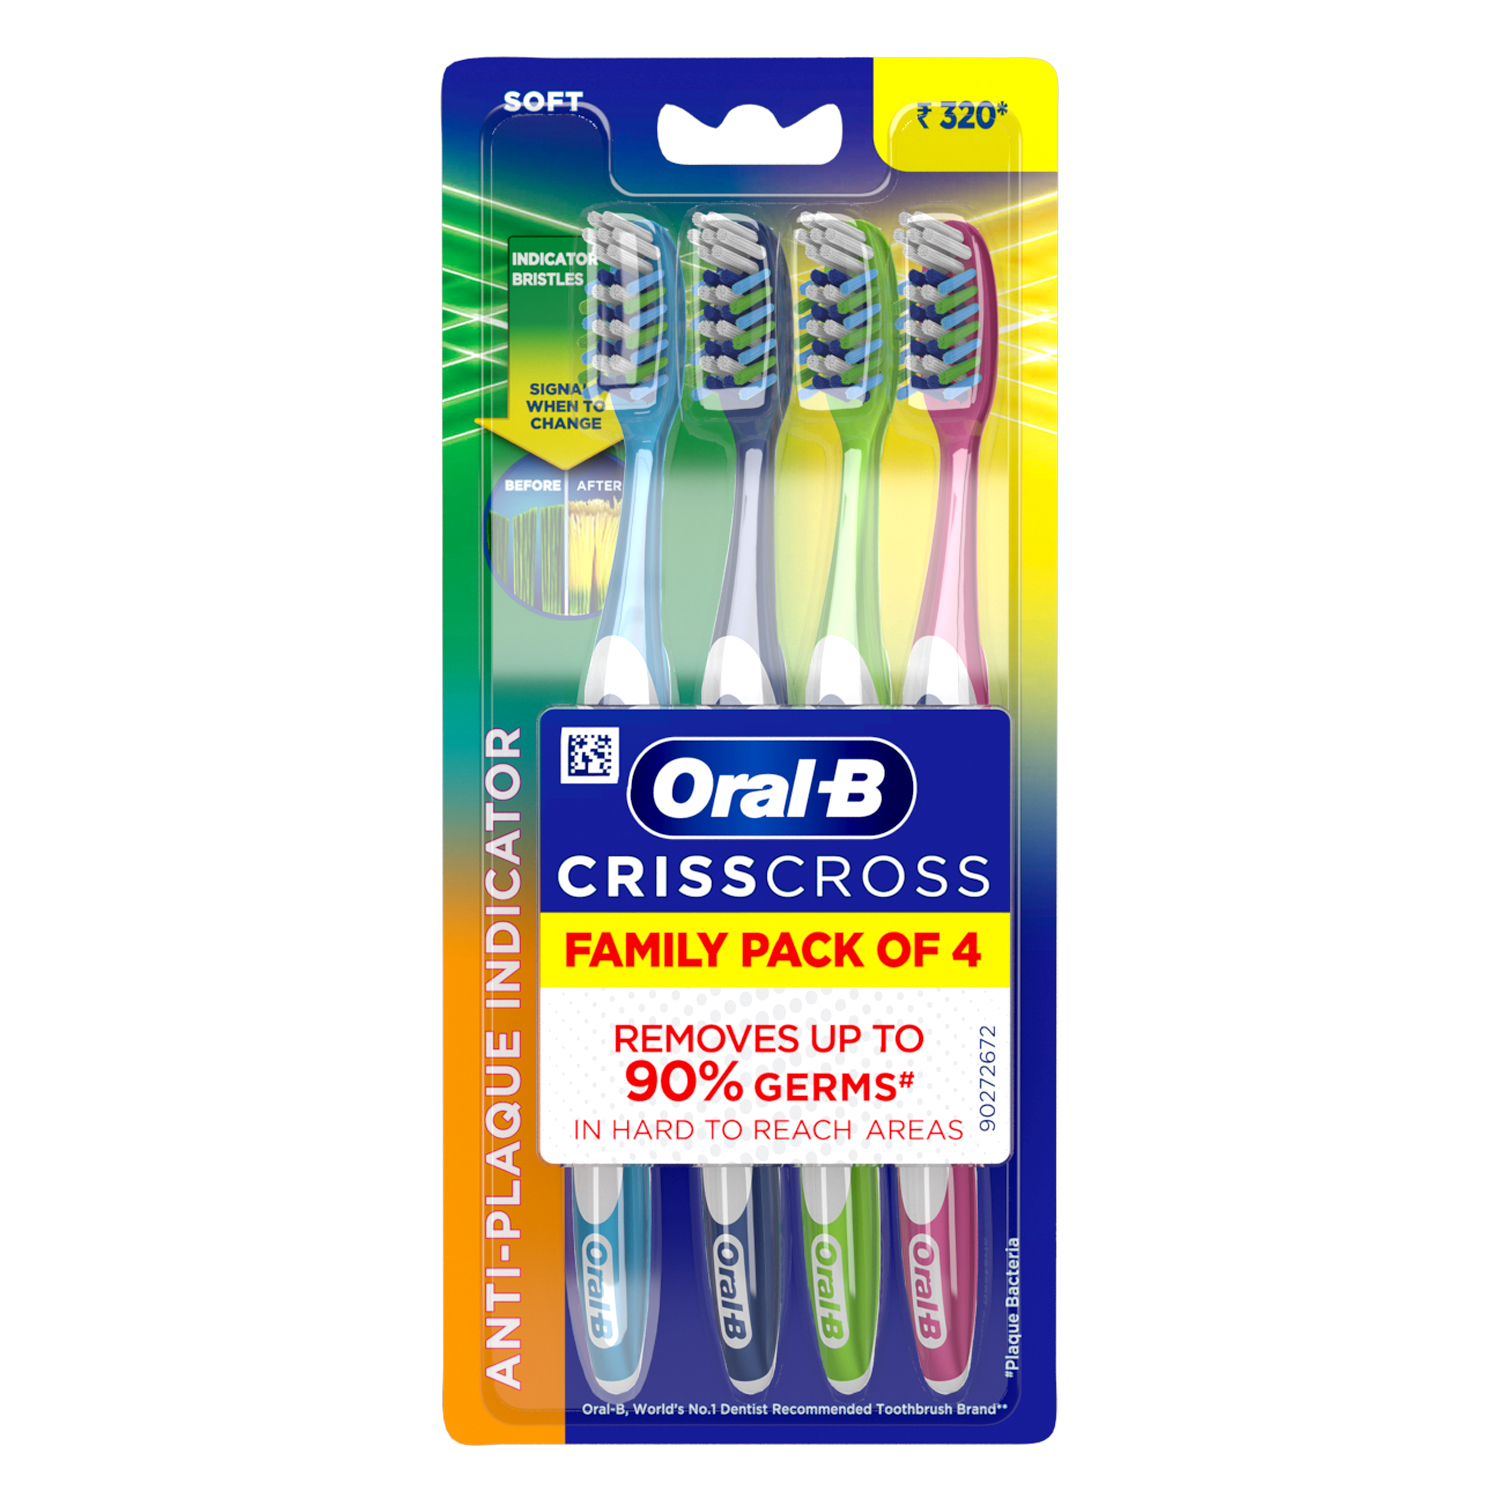 Oral B Criss Cross - Family pack of 4 toothbrushes – Soft